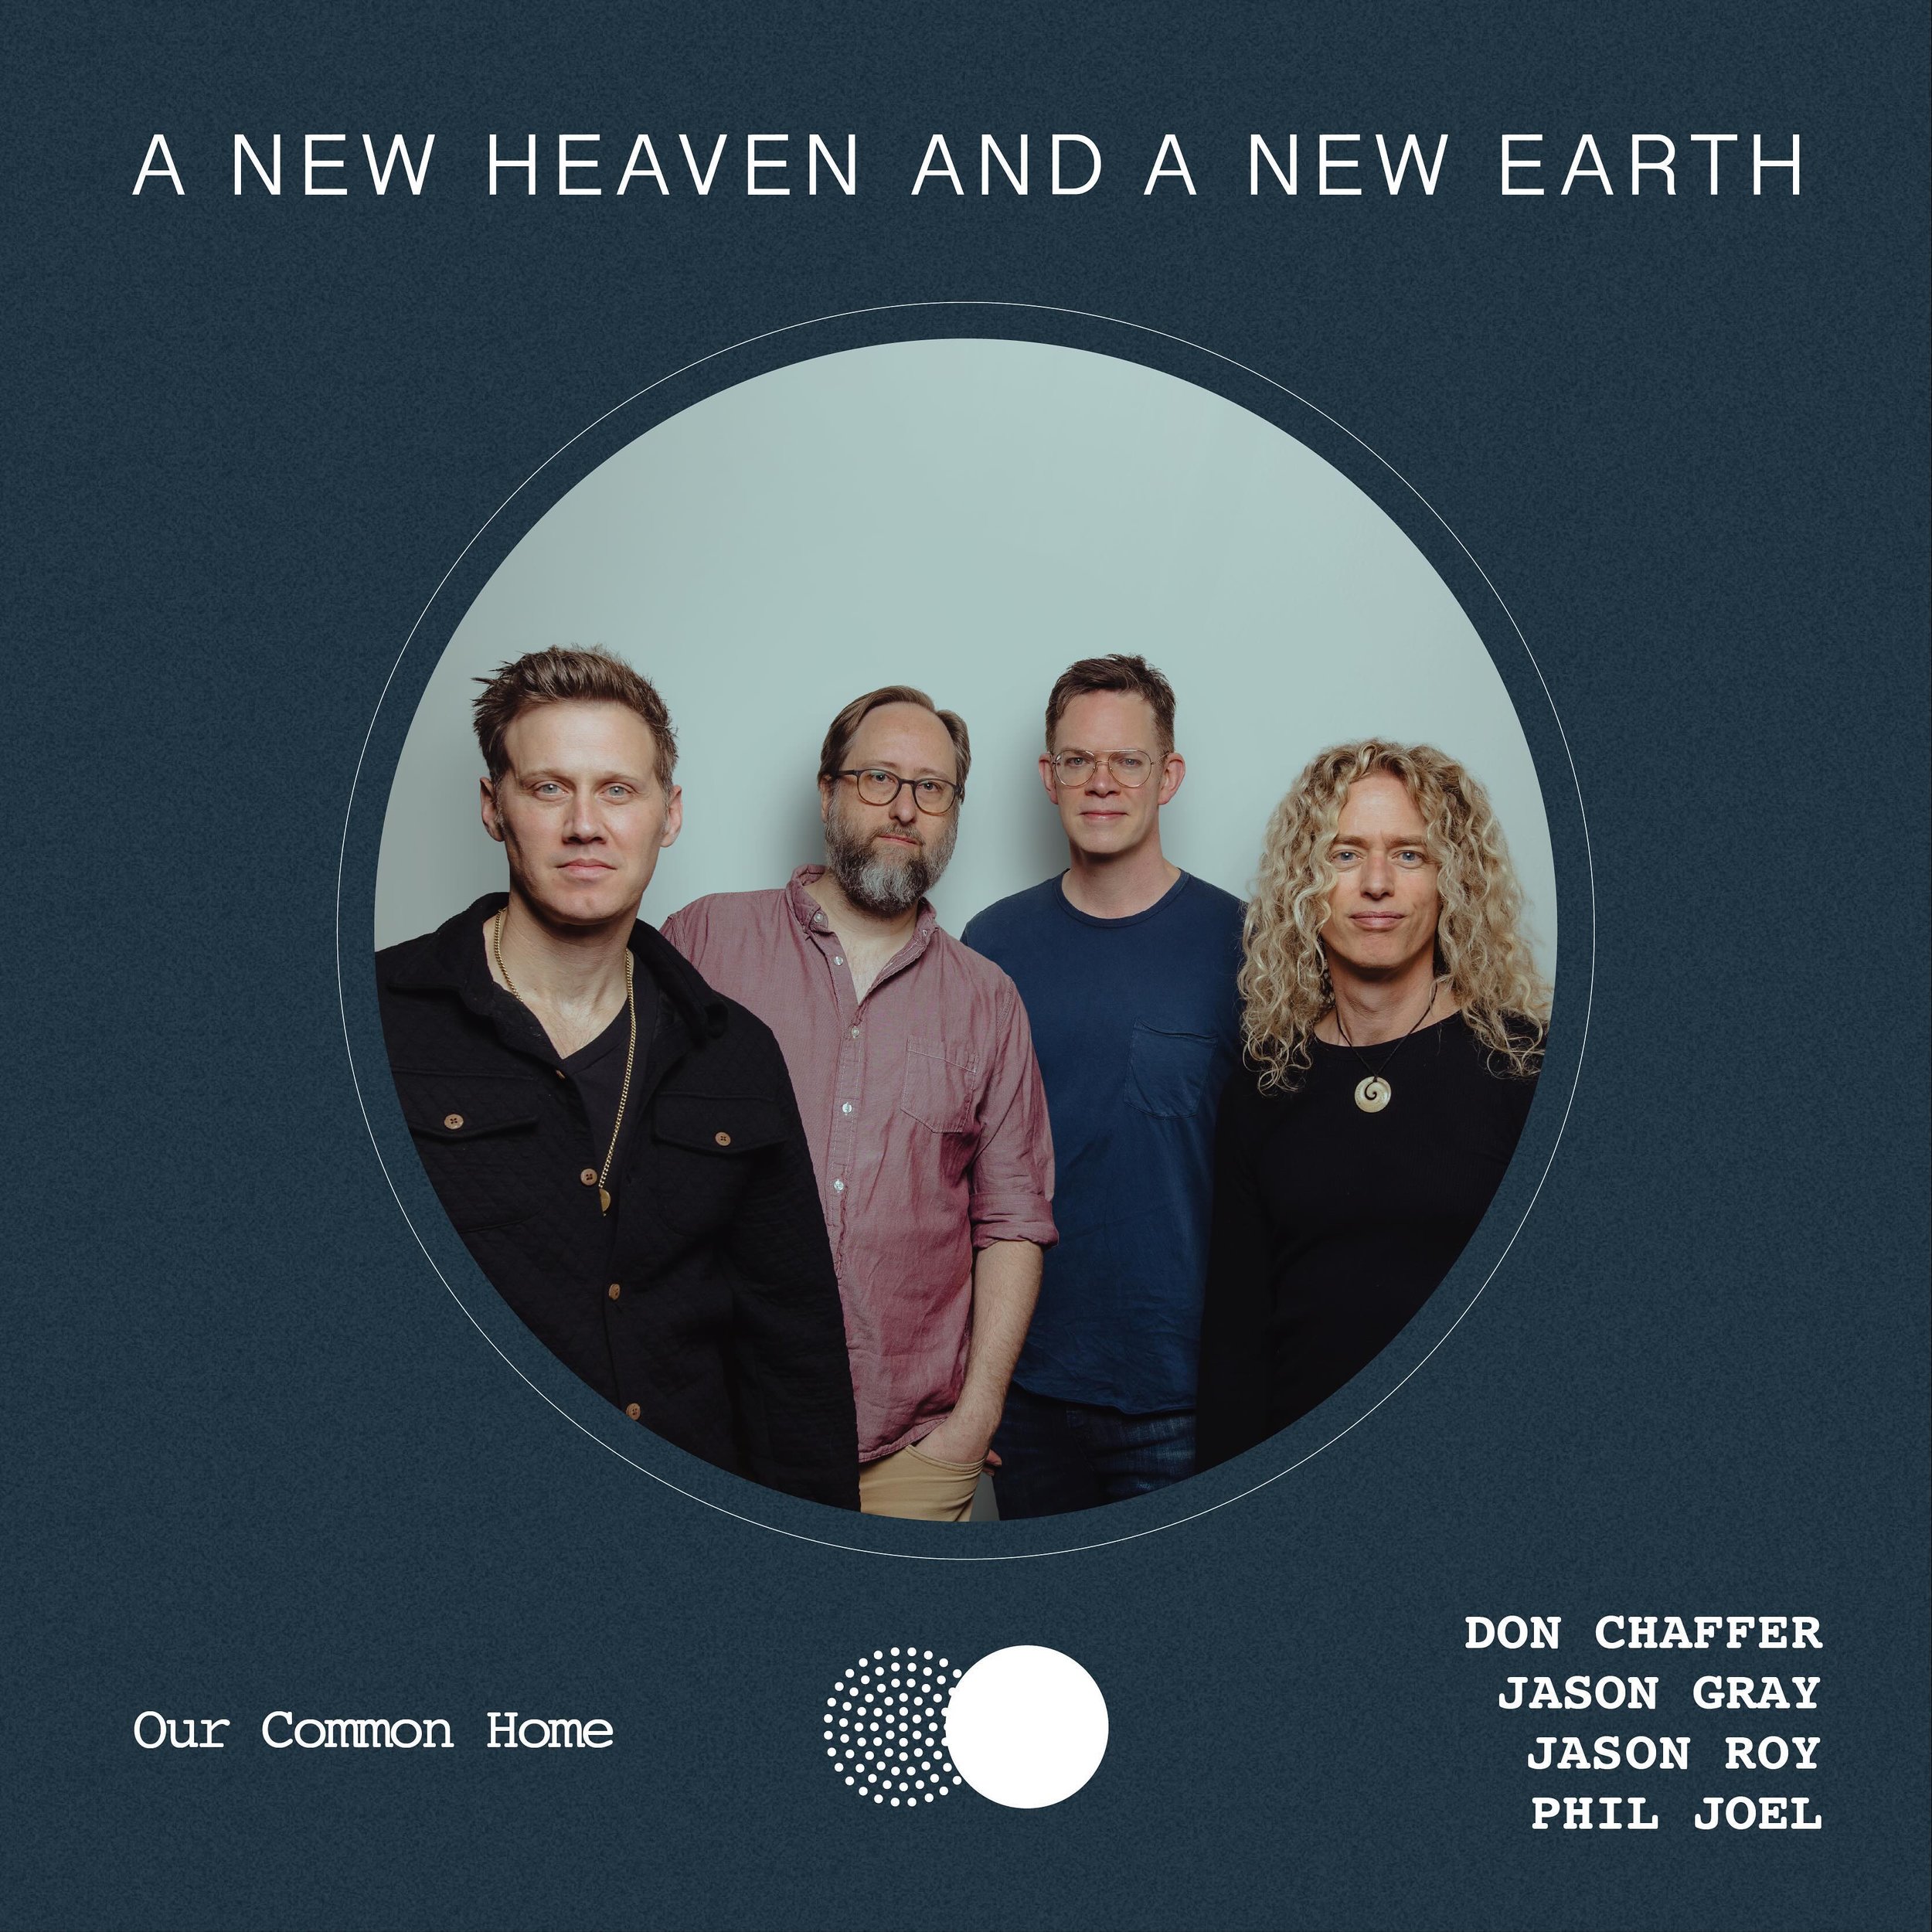 Today we&rsquo;re releasing another version of &ldquo;Our Common Home&rdquo;with @jasongraymusic joining @philjoelofficial @jroymusic &amp; @donchaffer on vocals. Link in bio.